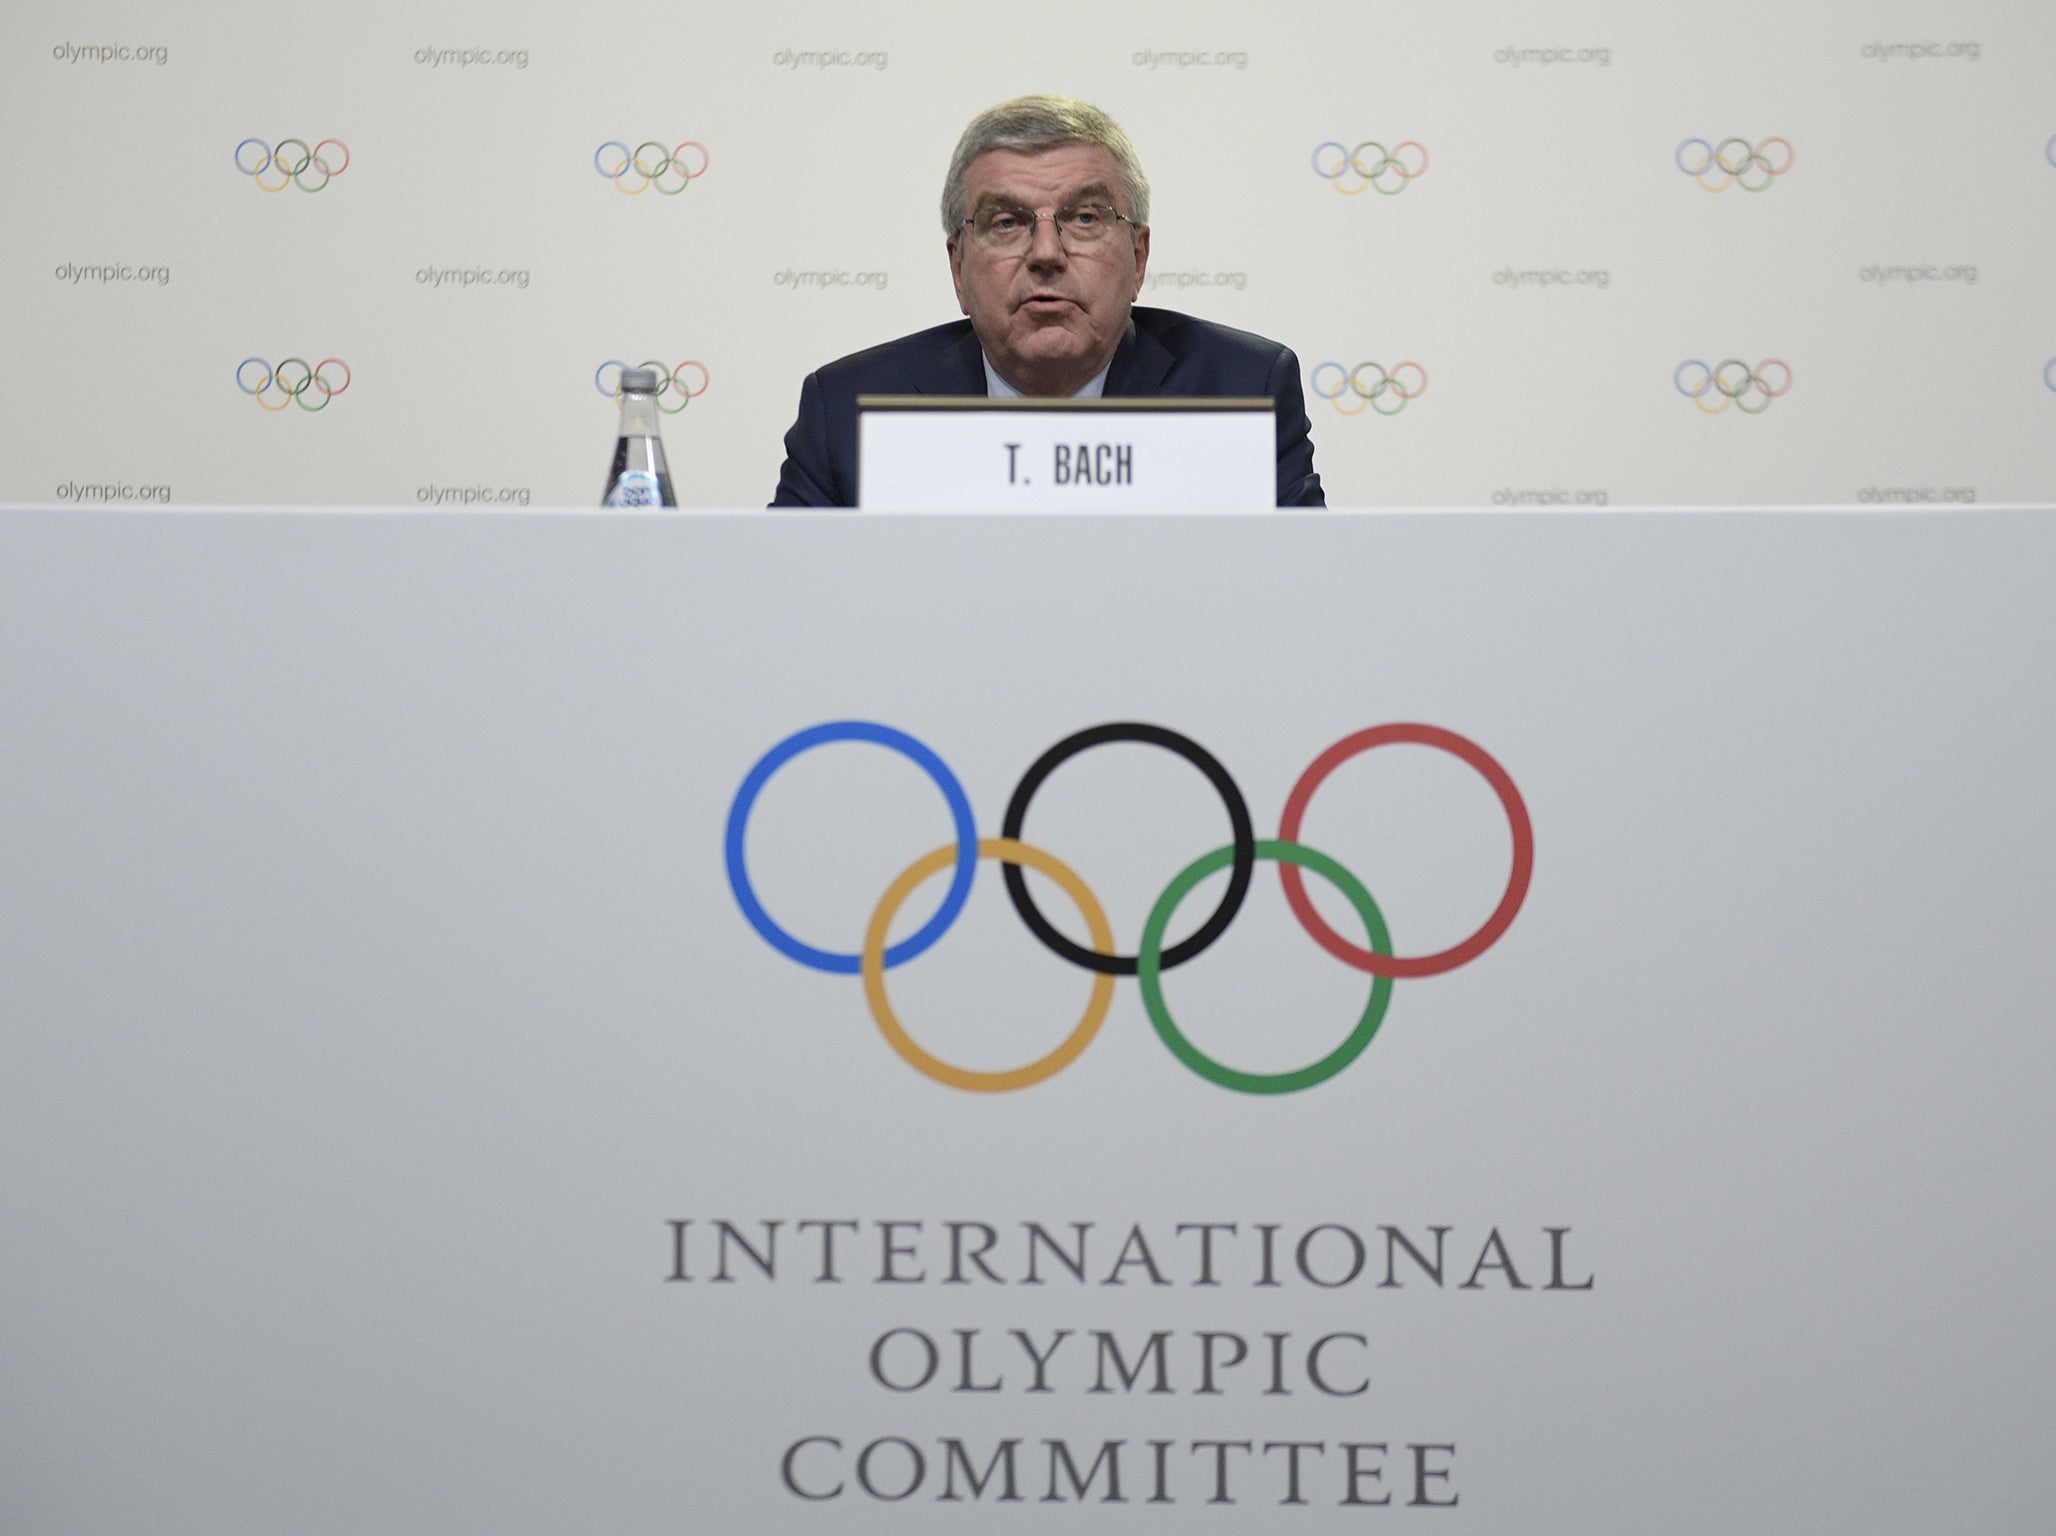 The IOC's stance is crystal clear